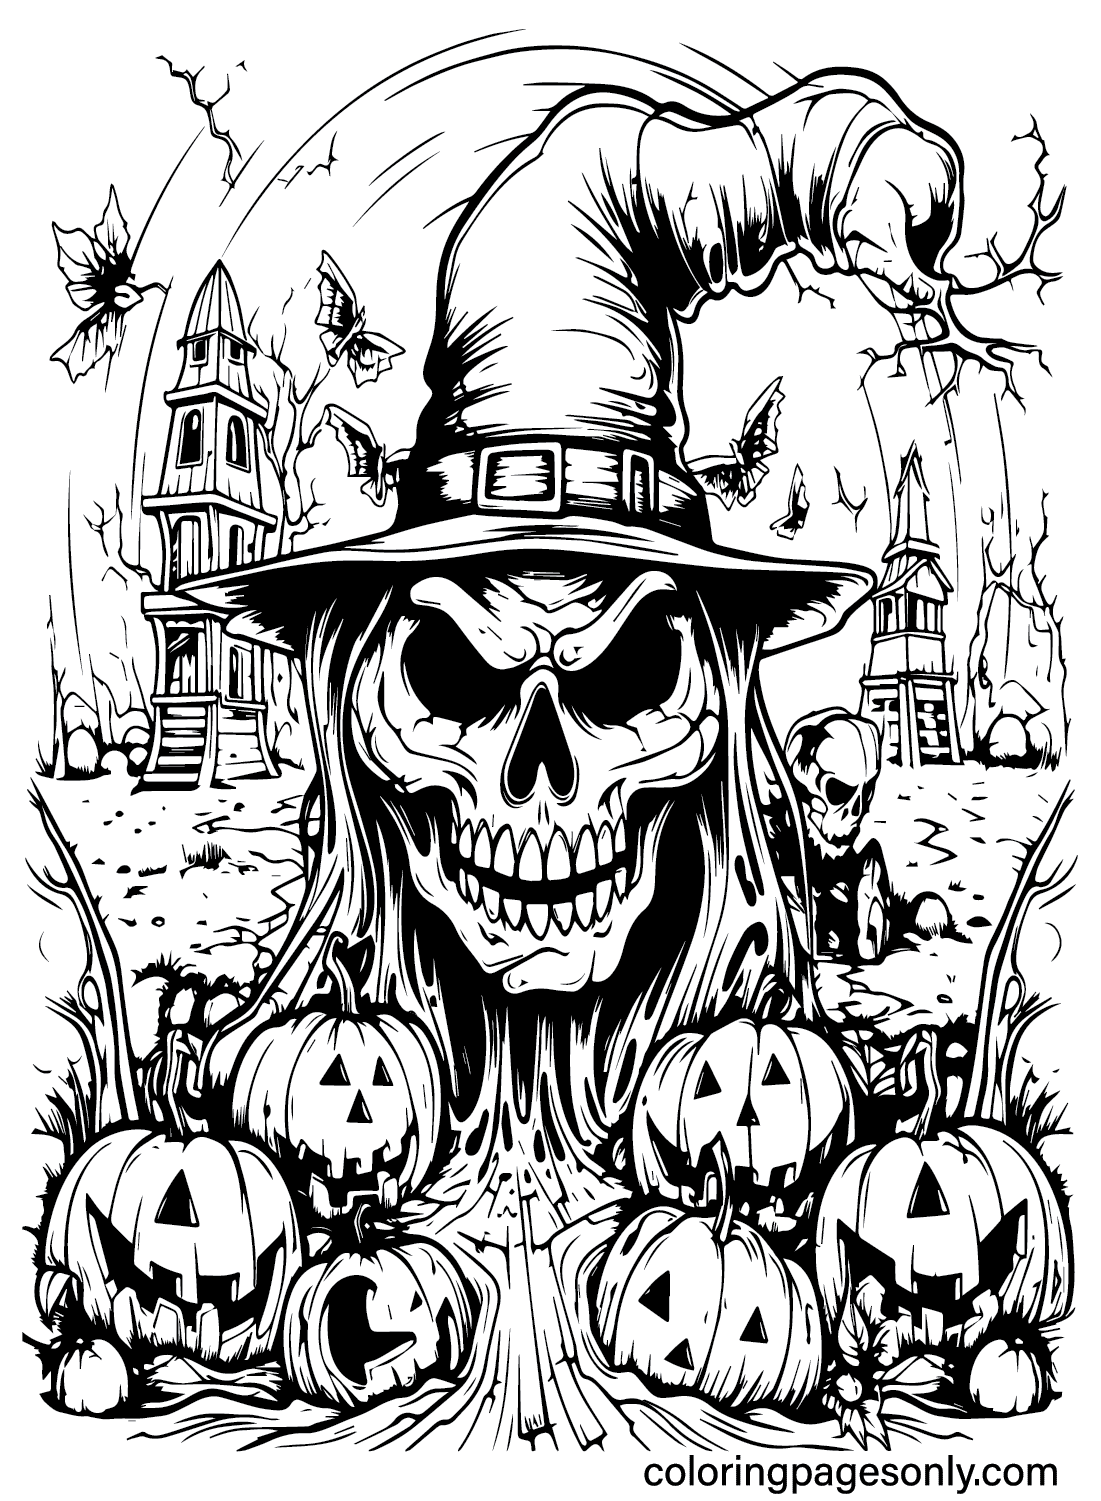 Scary Halloween Images to Color - Free Printable Coloring Pages